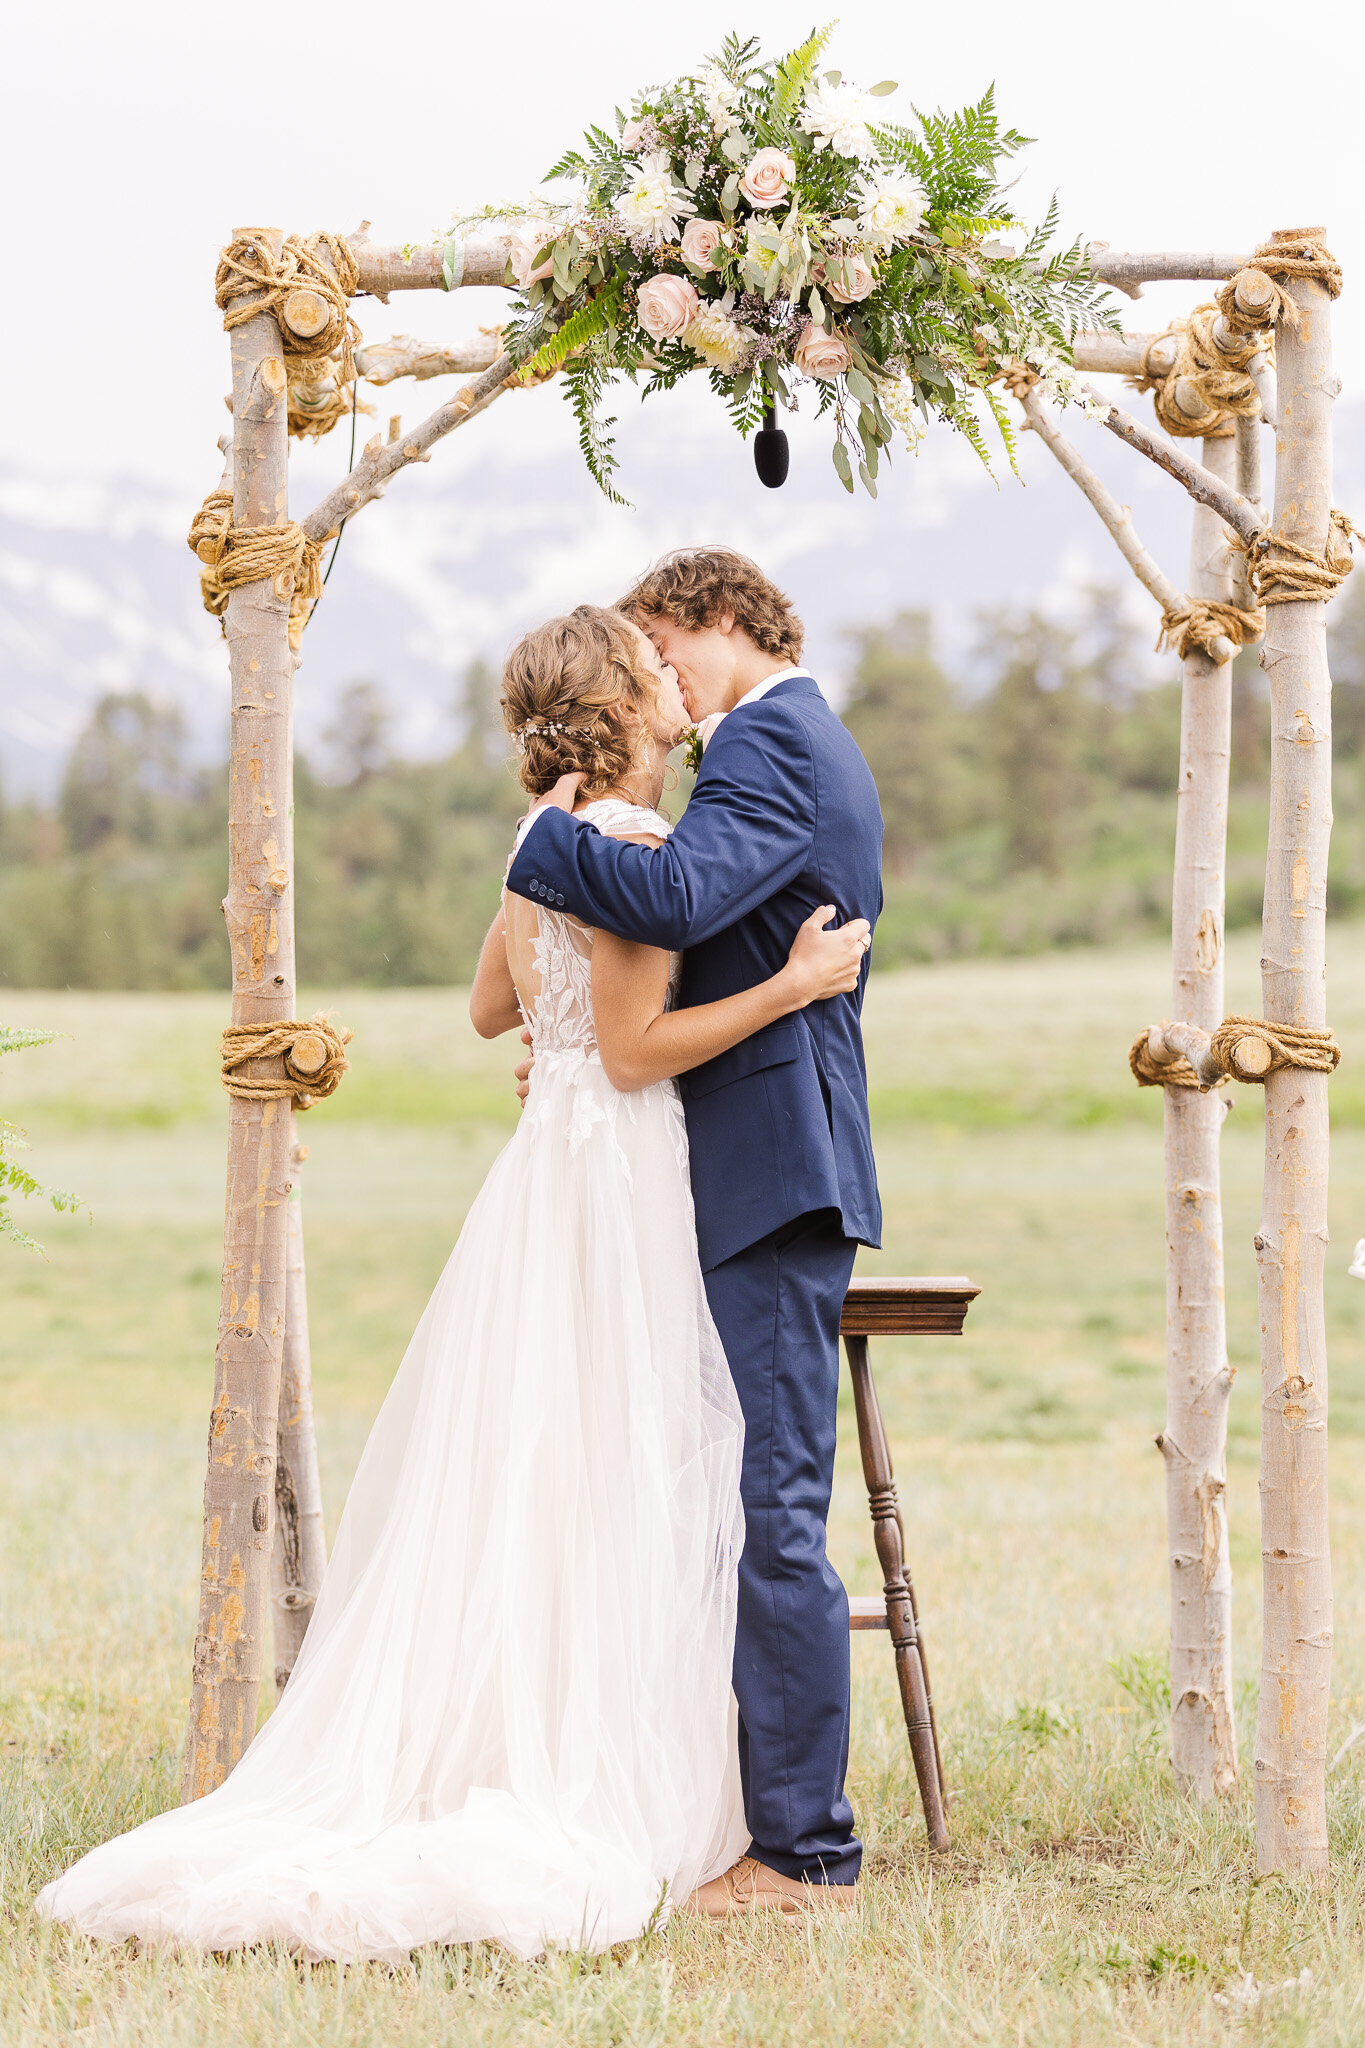 Bride and groom share a first kiss at top of the pines